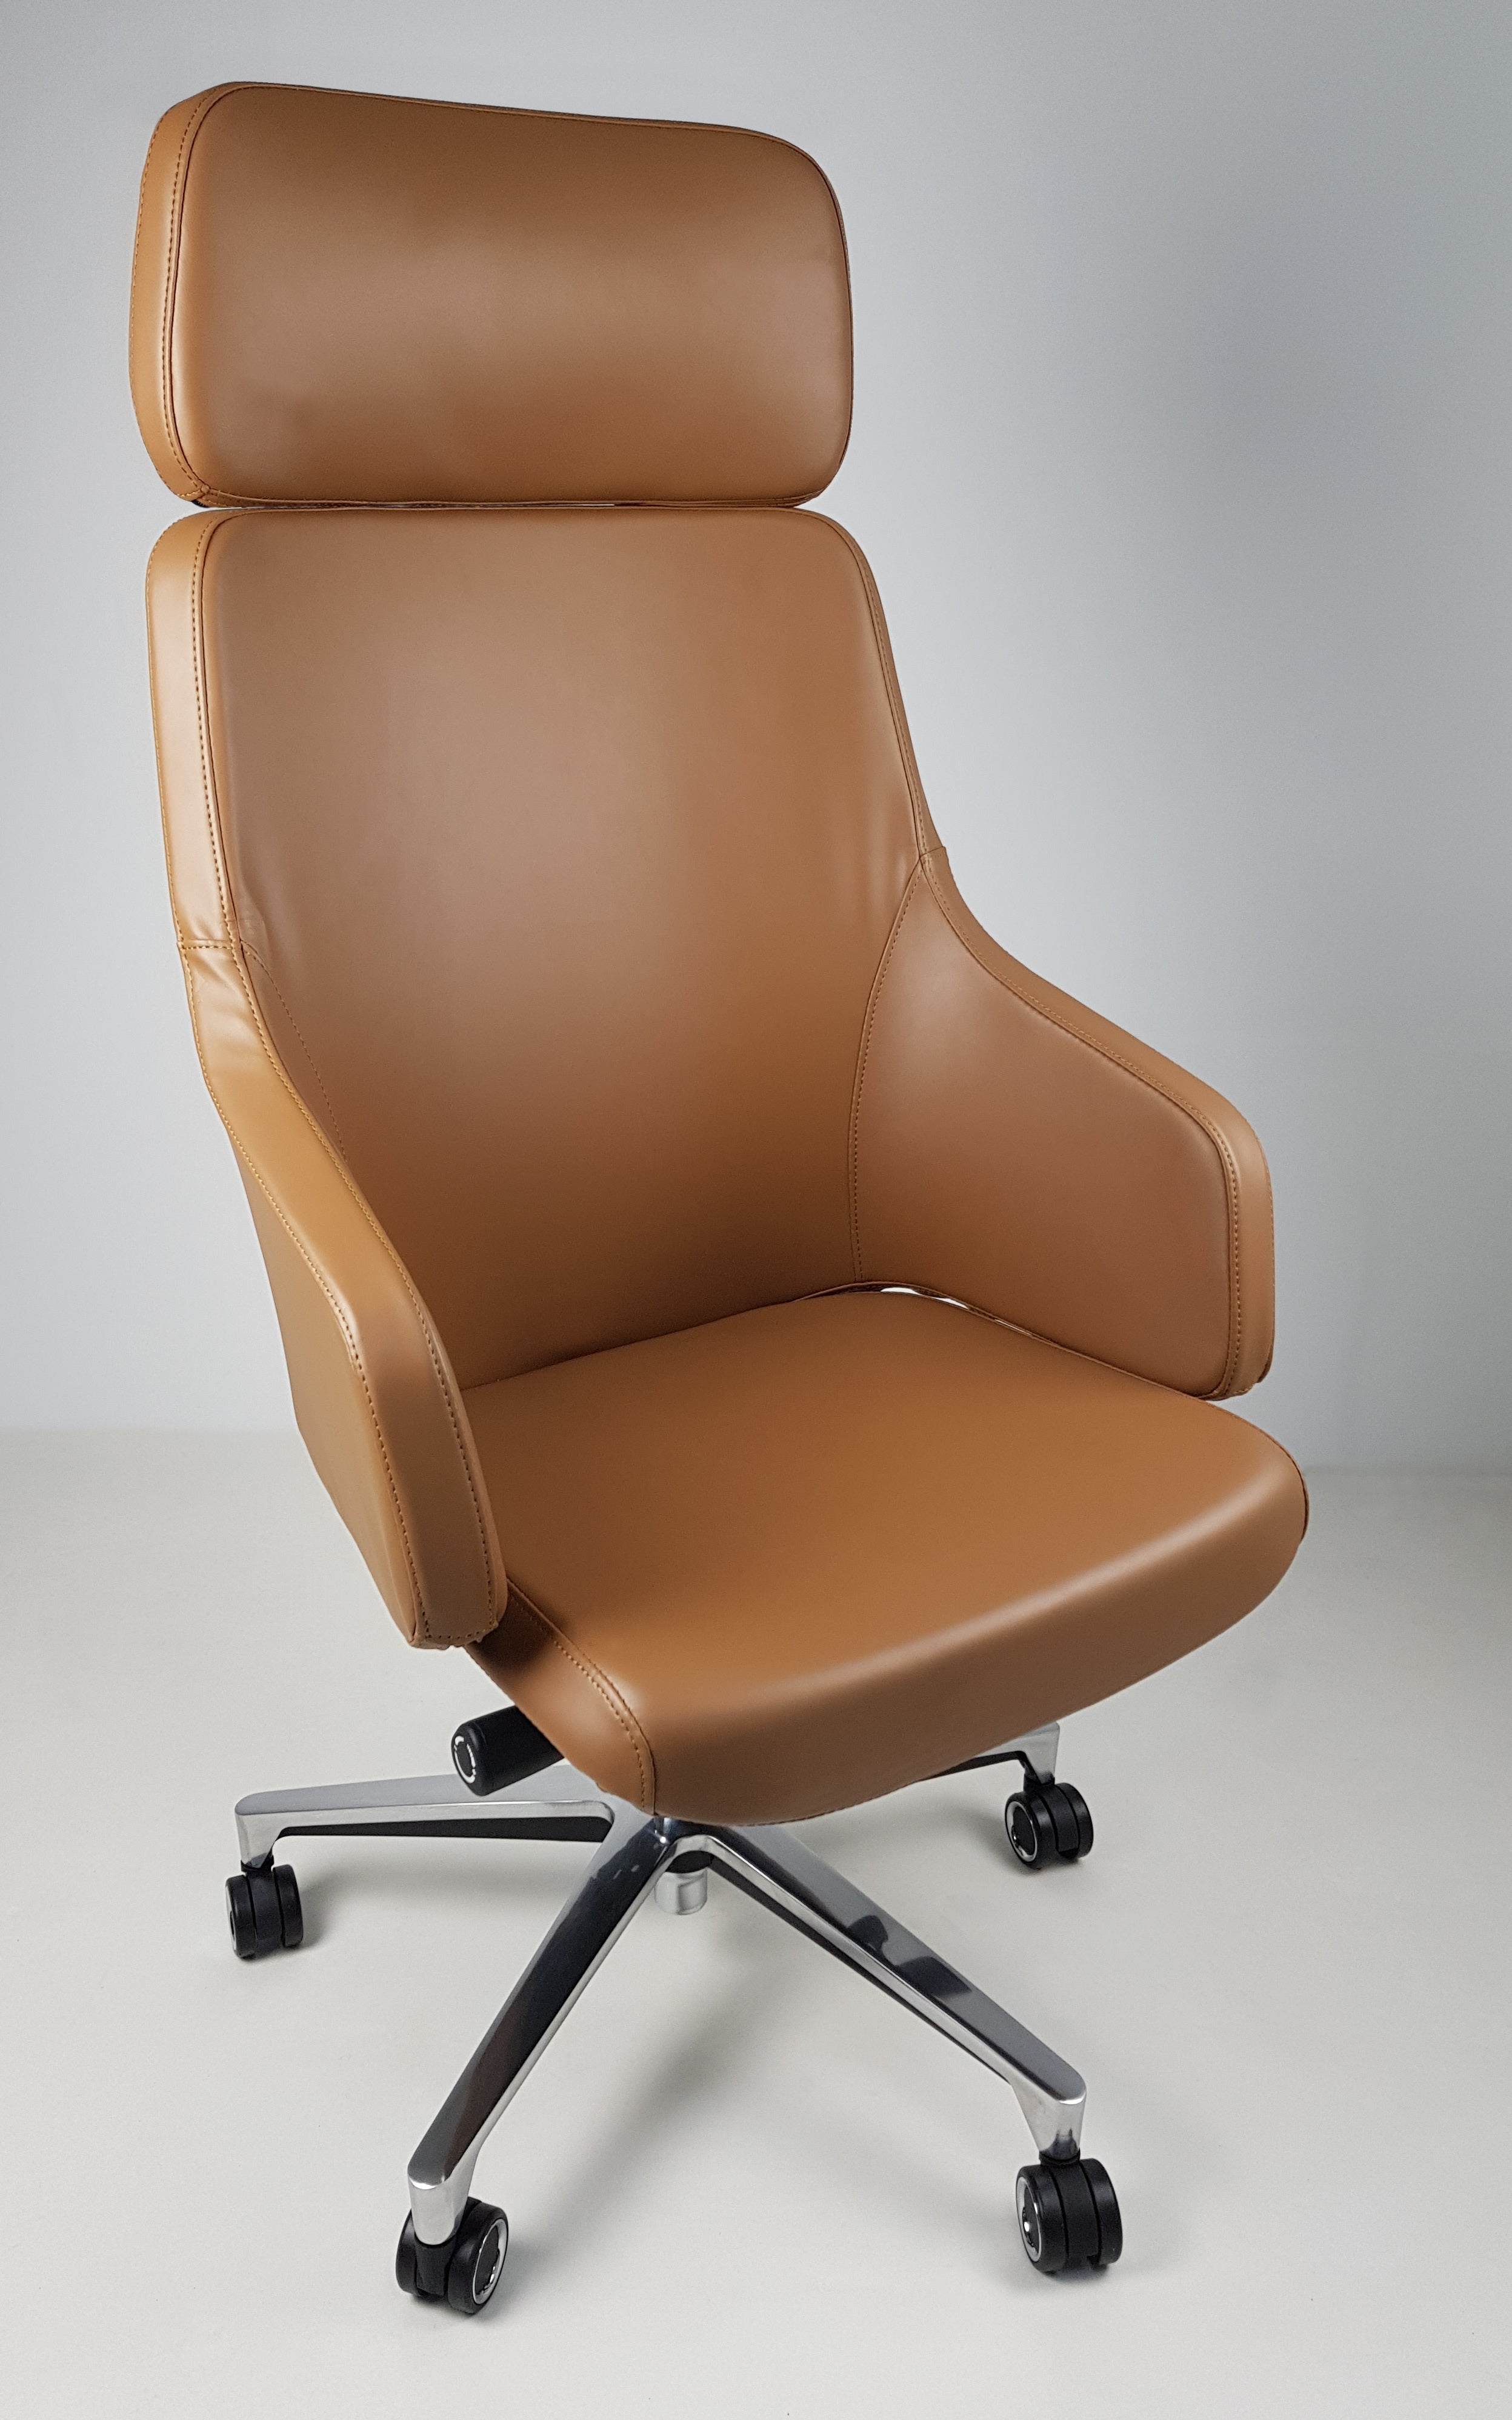 High Back Tan Leather Executive Office Chair with Seat Slide - CHA-1823A UK